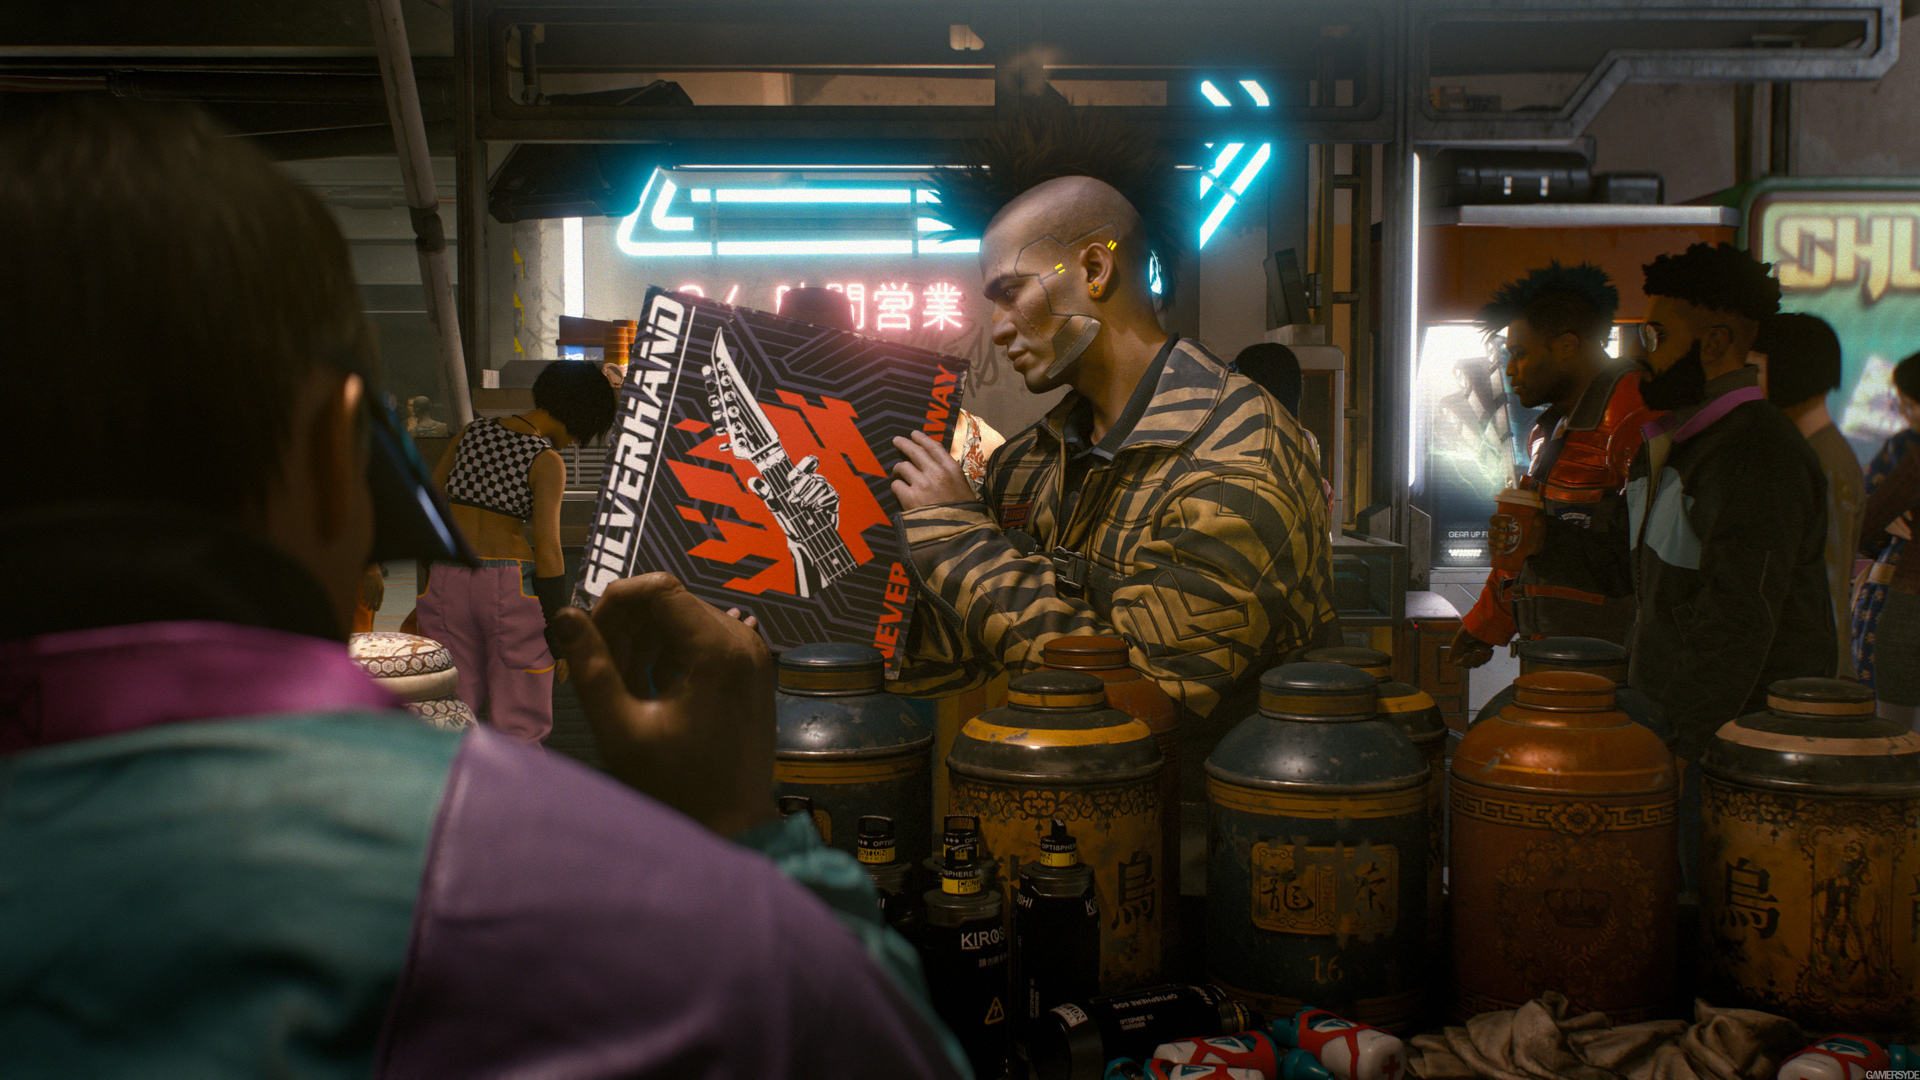 Cyberpunk 2077 Rating Agency Lists 27 Reasons Why The Game Is